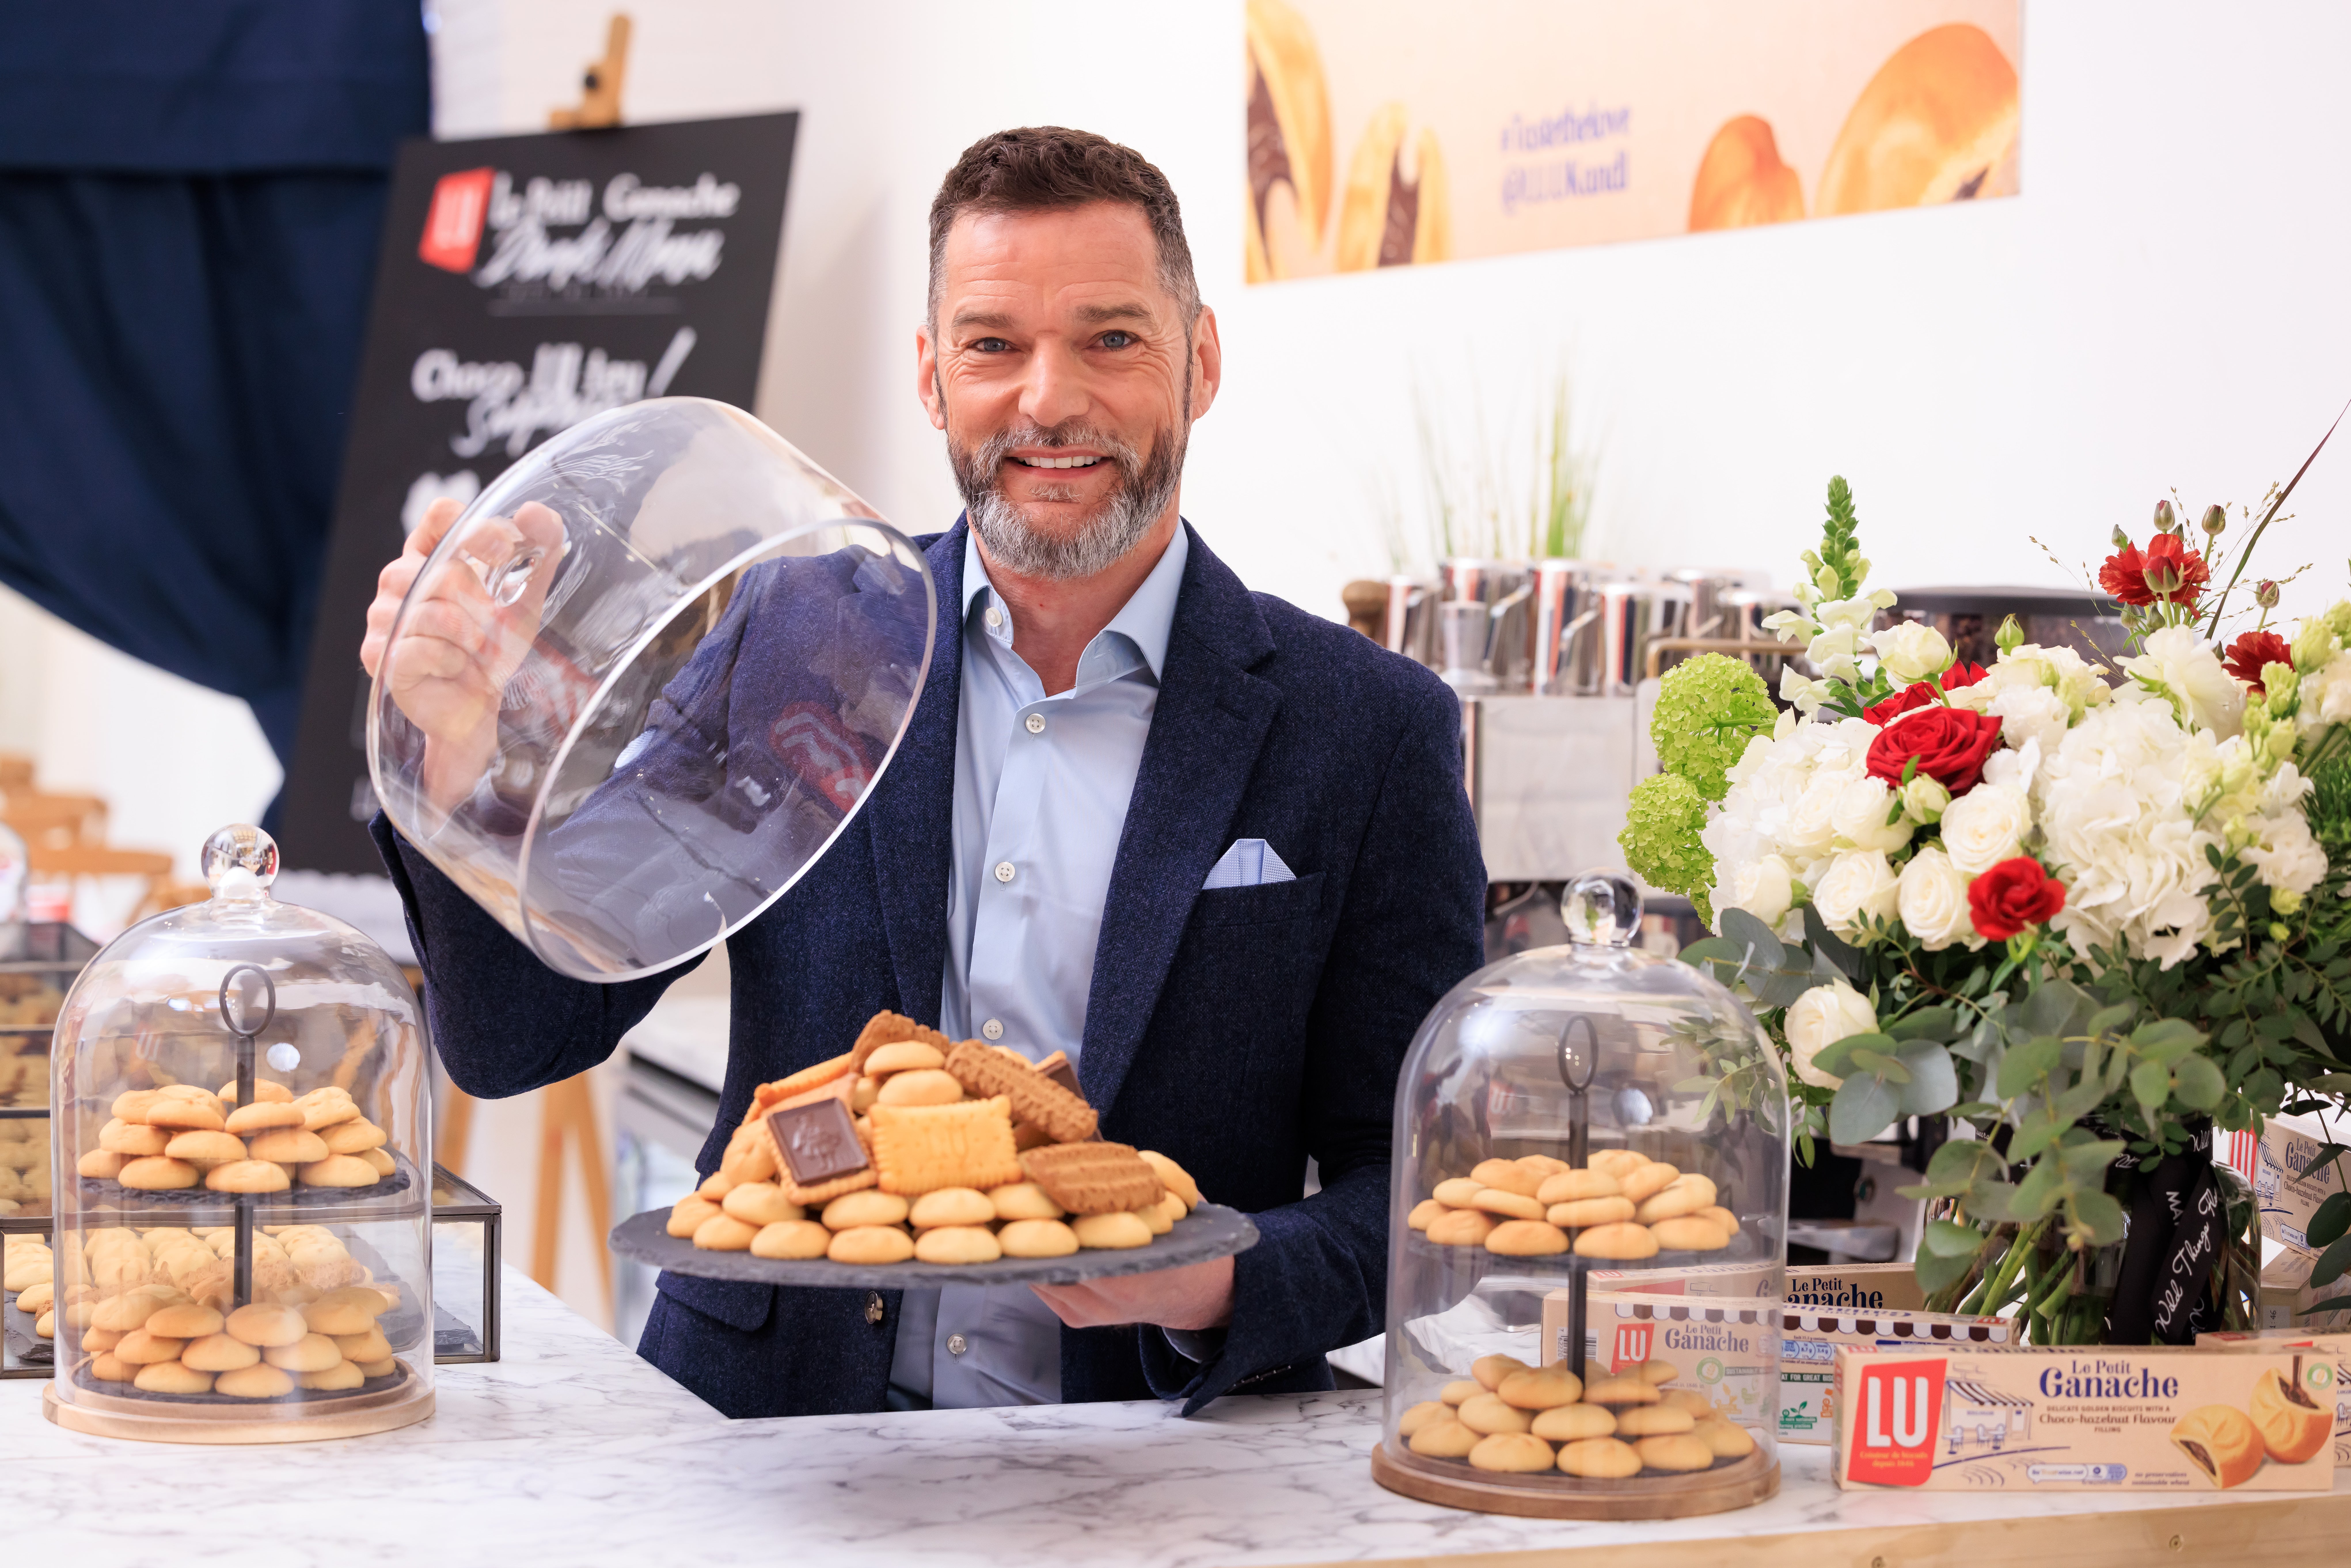 The research was commissioned by French biscuit brand, LU, who alongside TV presenter Fred Sirieix, are surprising the public at a pop-up shop in Soho